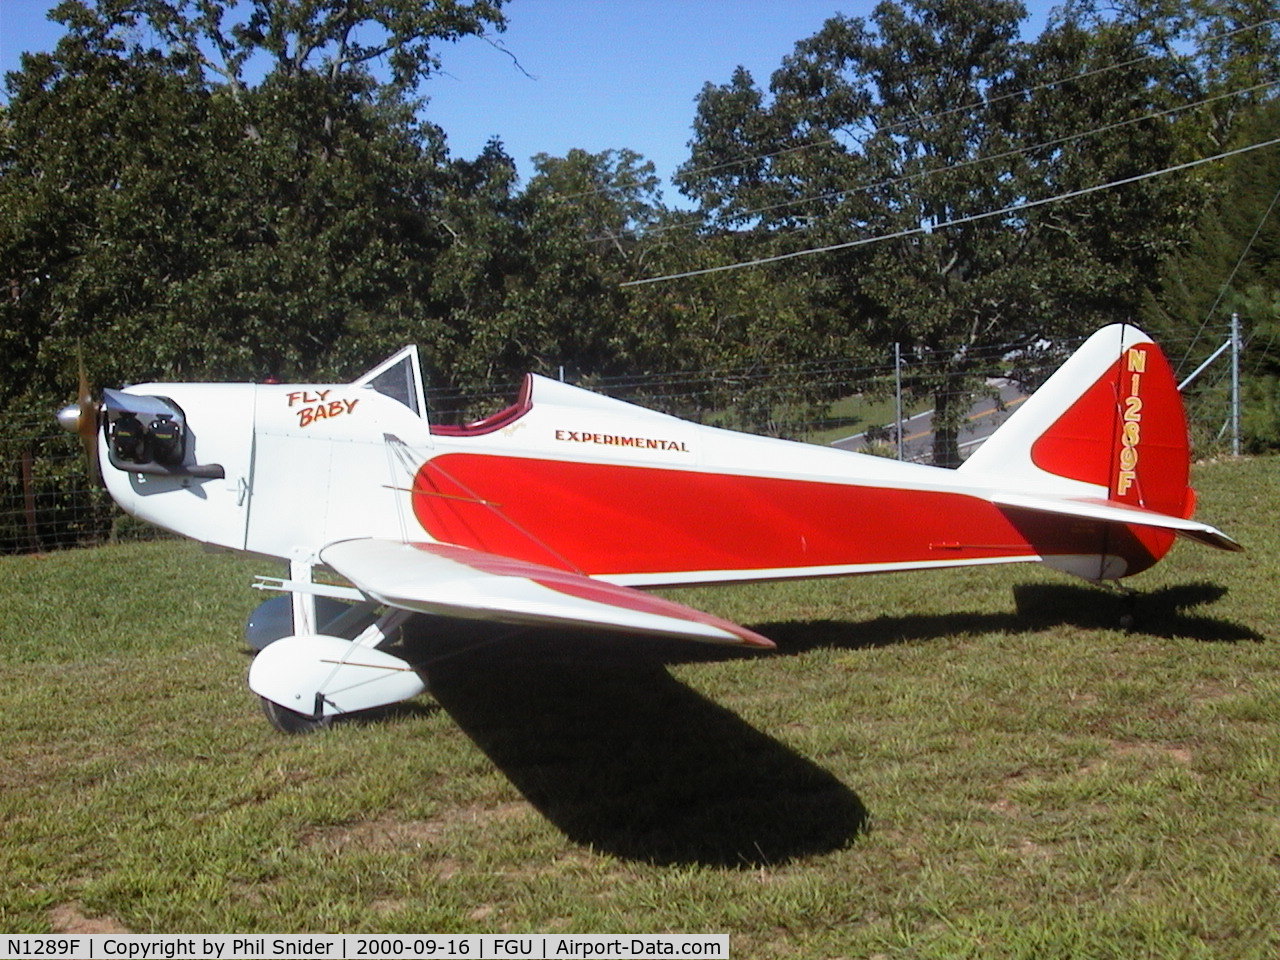 N1289F, 1976 Bowers Fly Baby 1A C/N 564, Collegedale TN